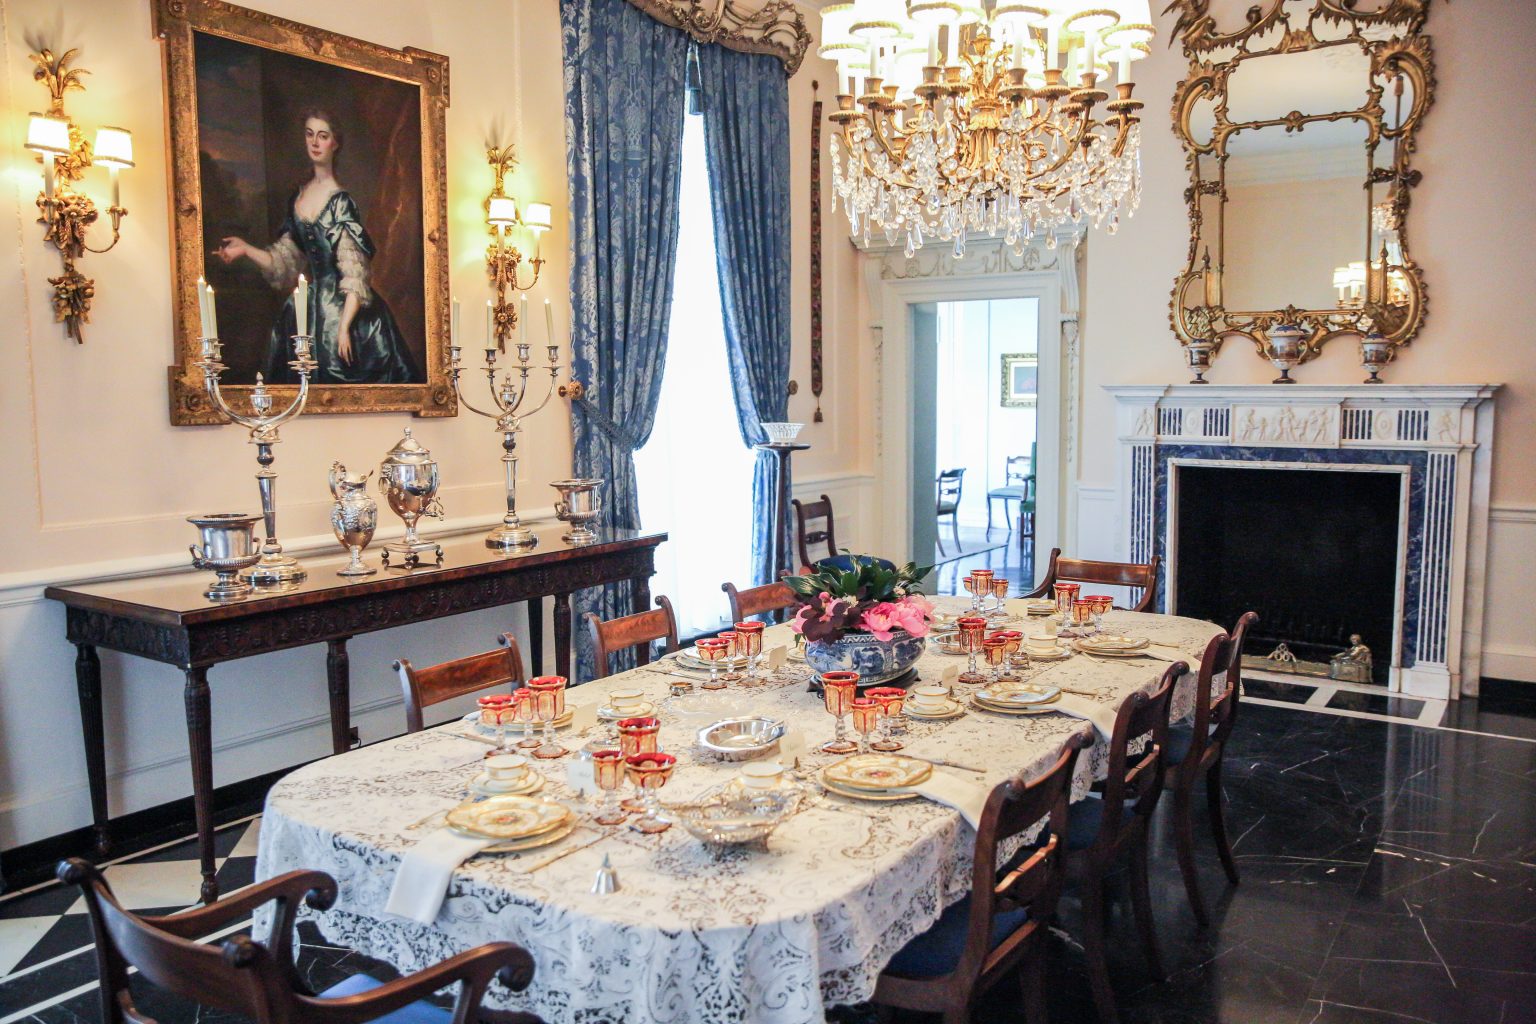 Dining Room in the Cheek Mansion